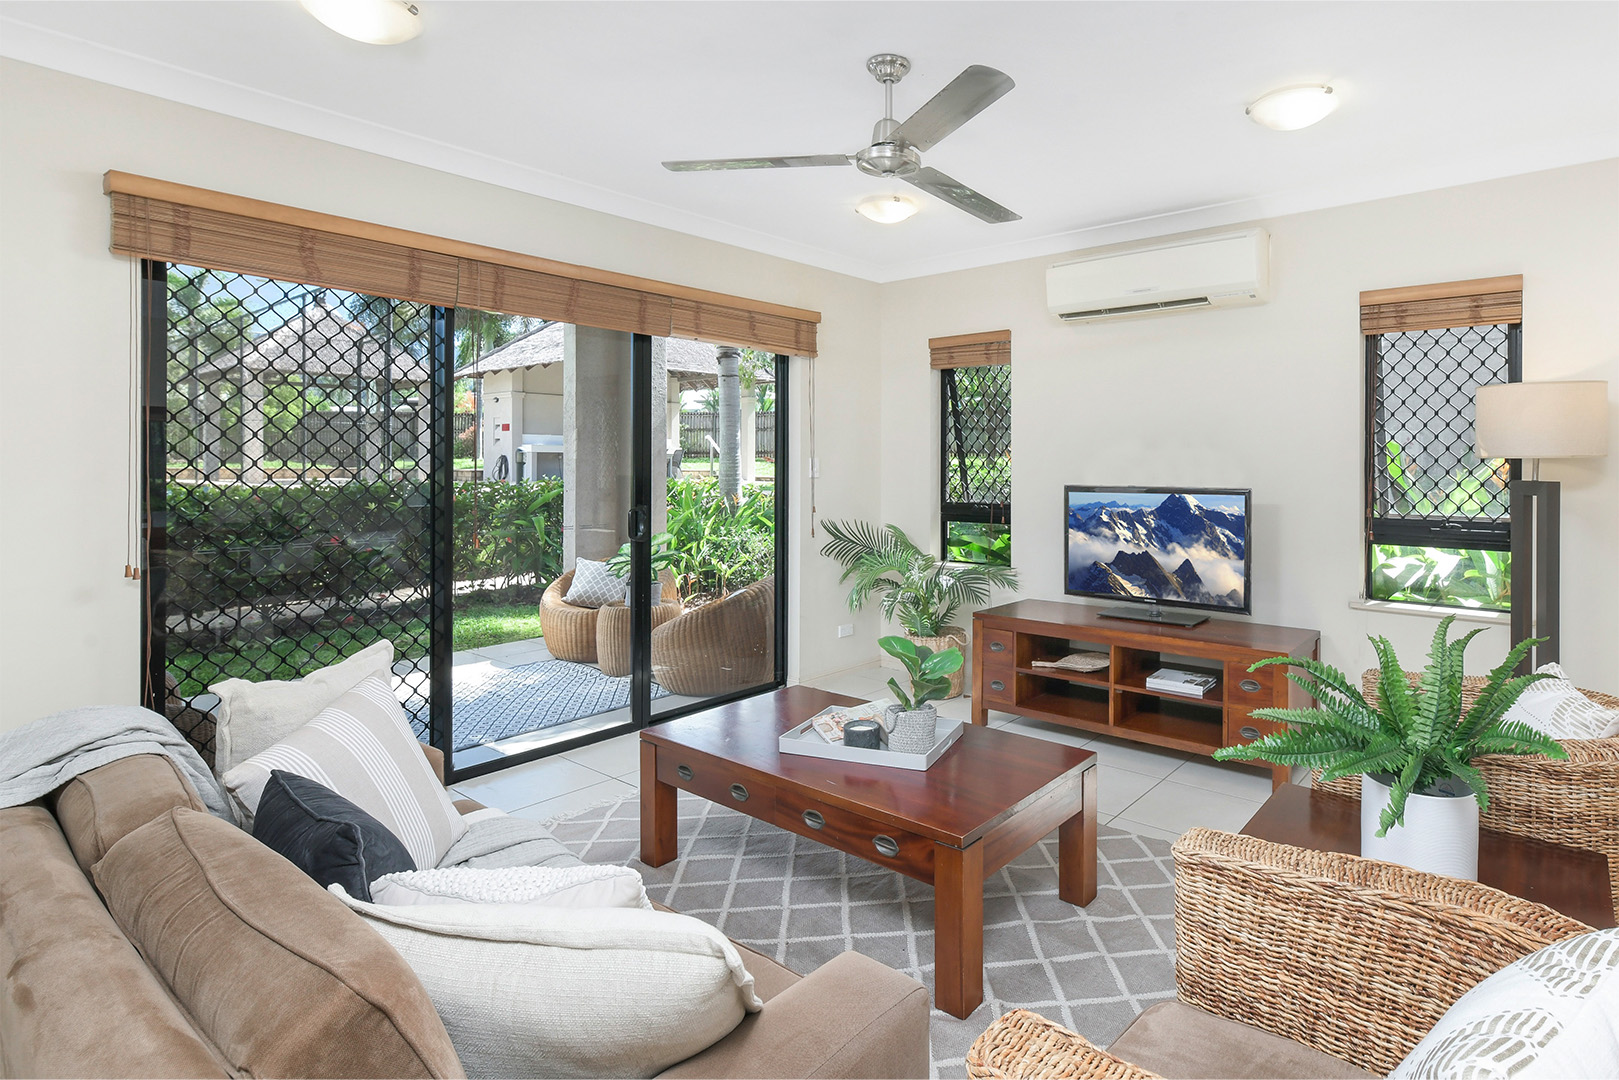 Living space at City View Villas with lounge and french doors